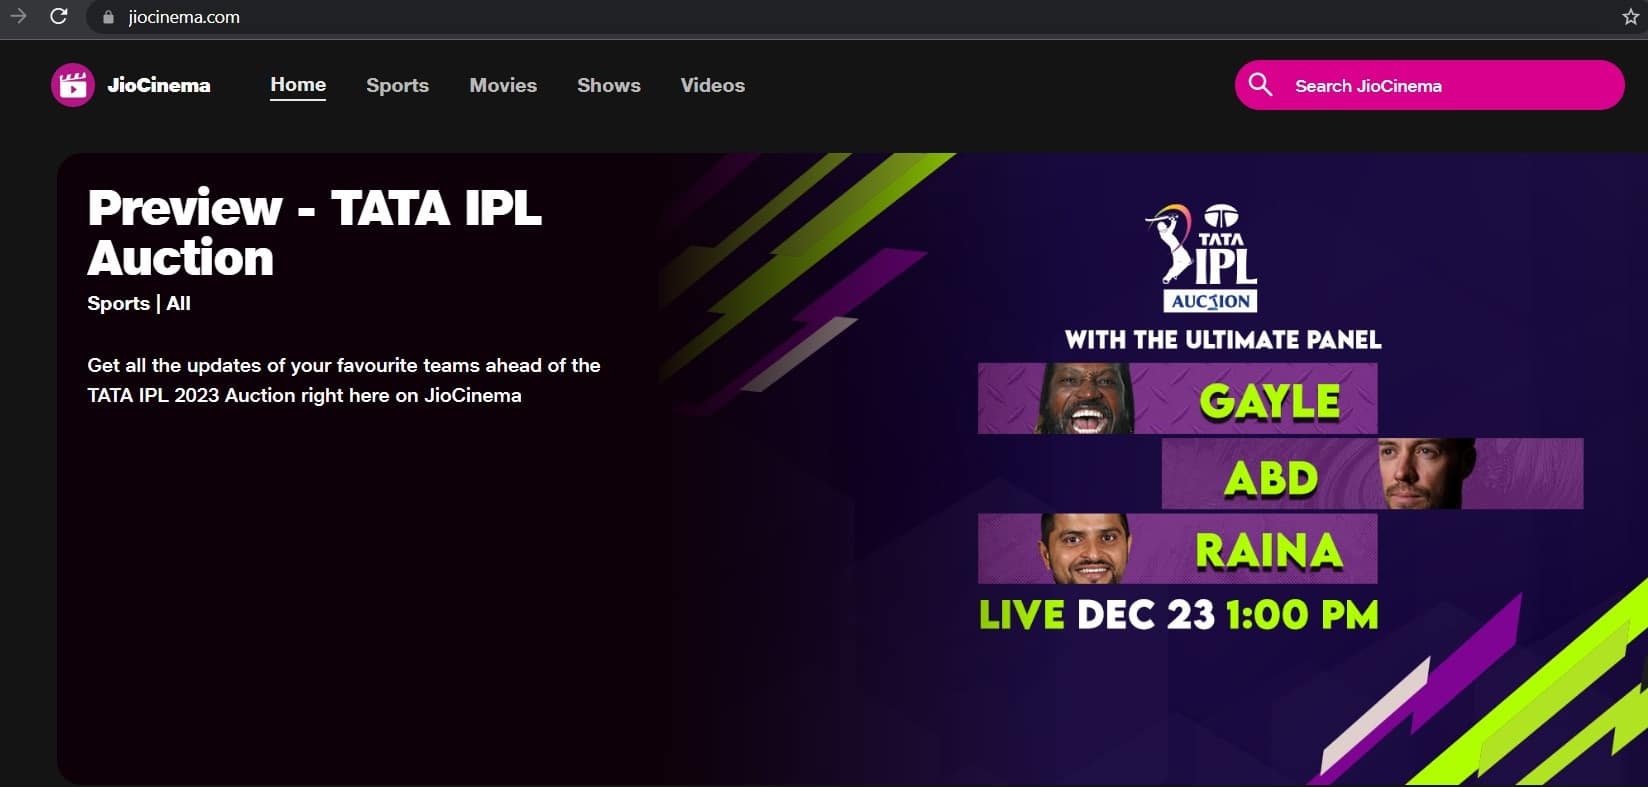 Where to watch IPL 2023 auction online for free? Hotstar or JIO Cinema